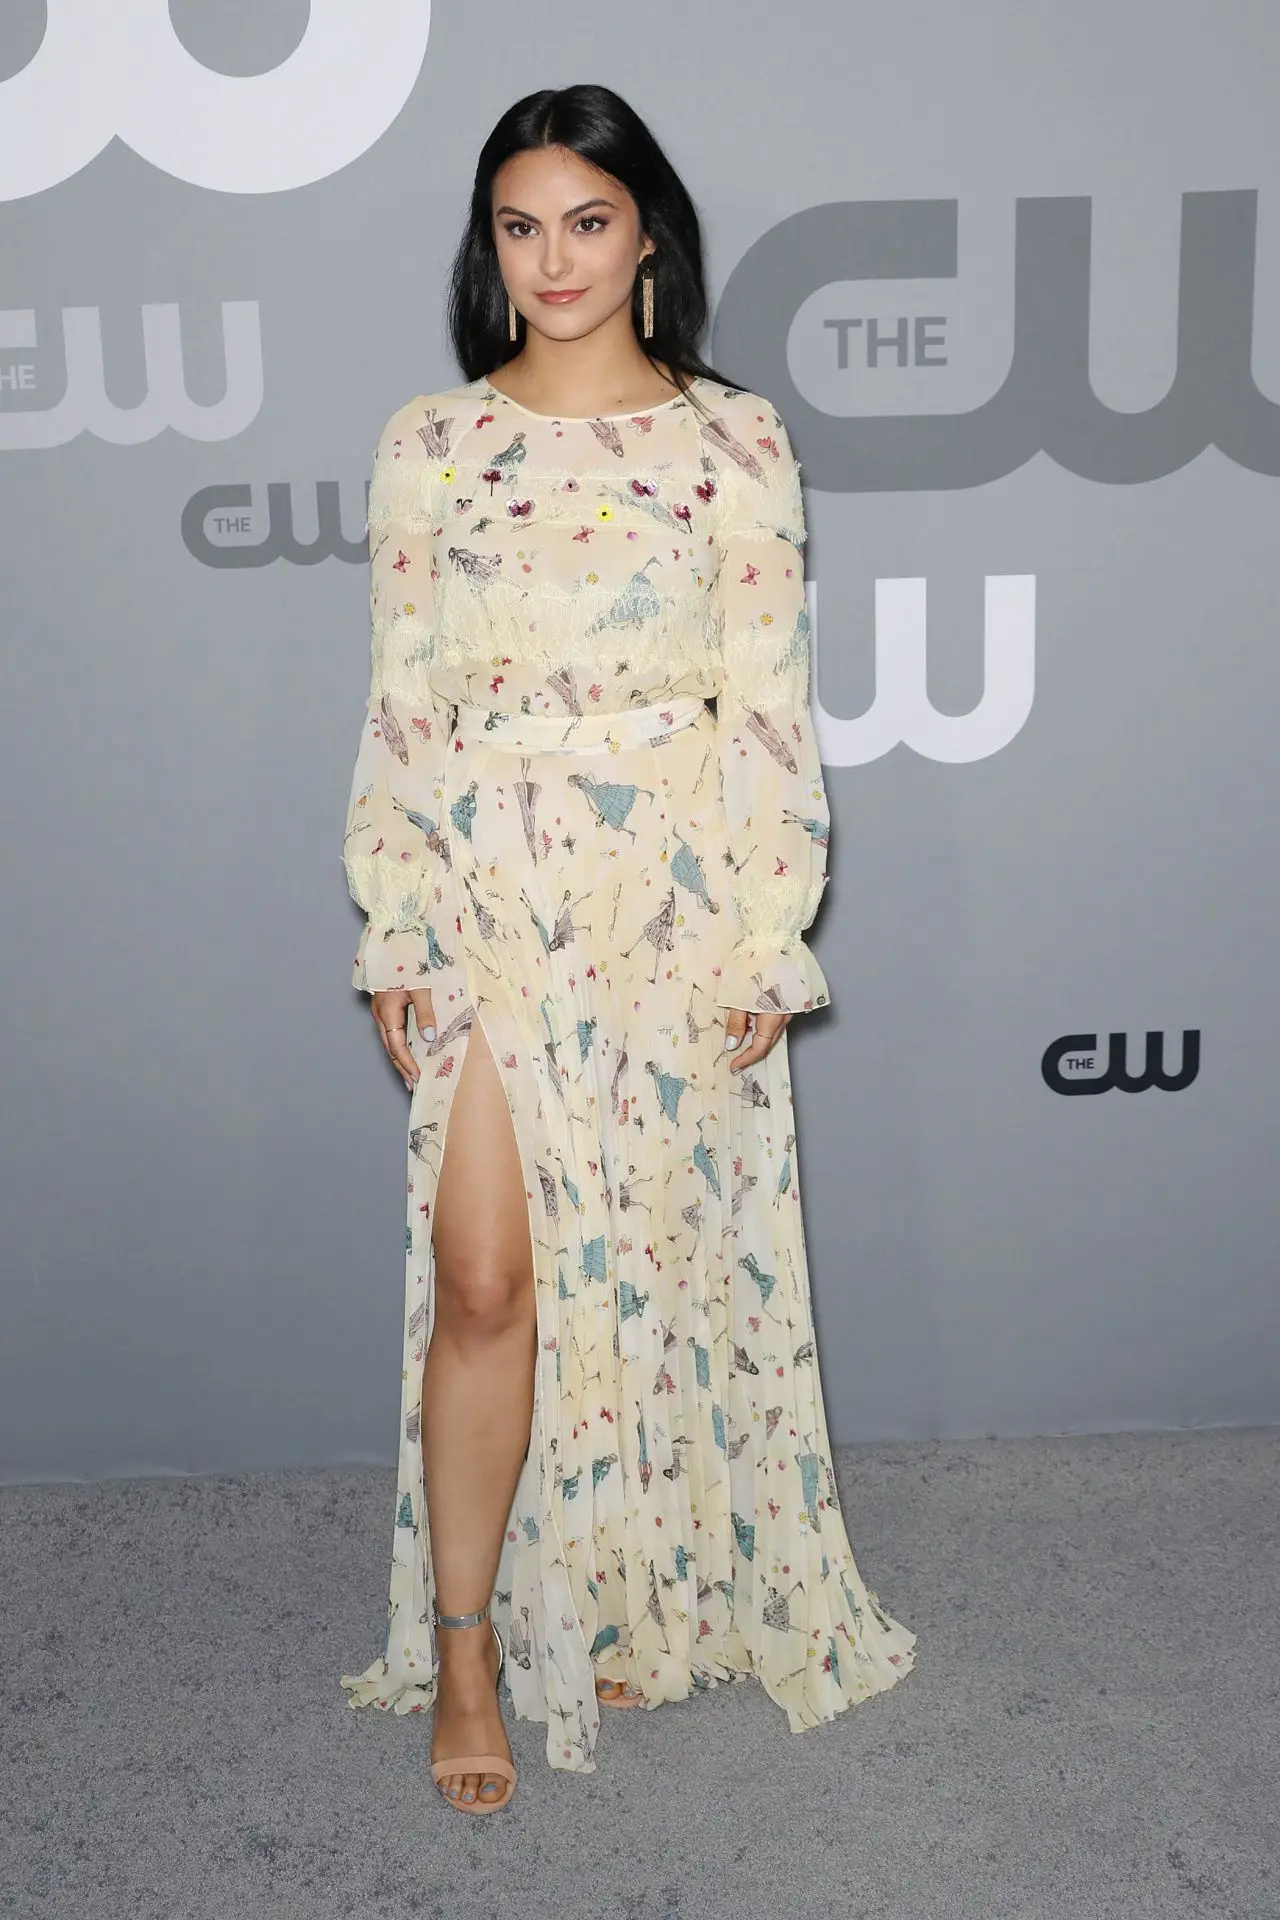 CAMILA MENDES AT CW NETWORK UPFRONT PRESENTATION IN NEW YORK CITY3